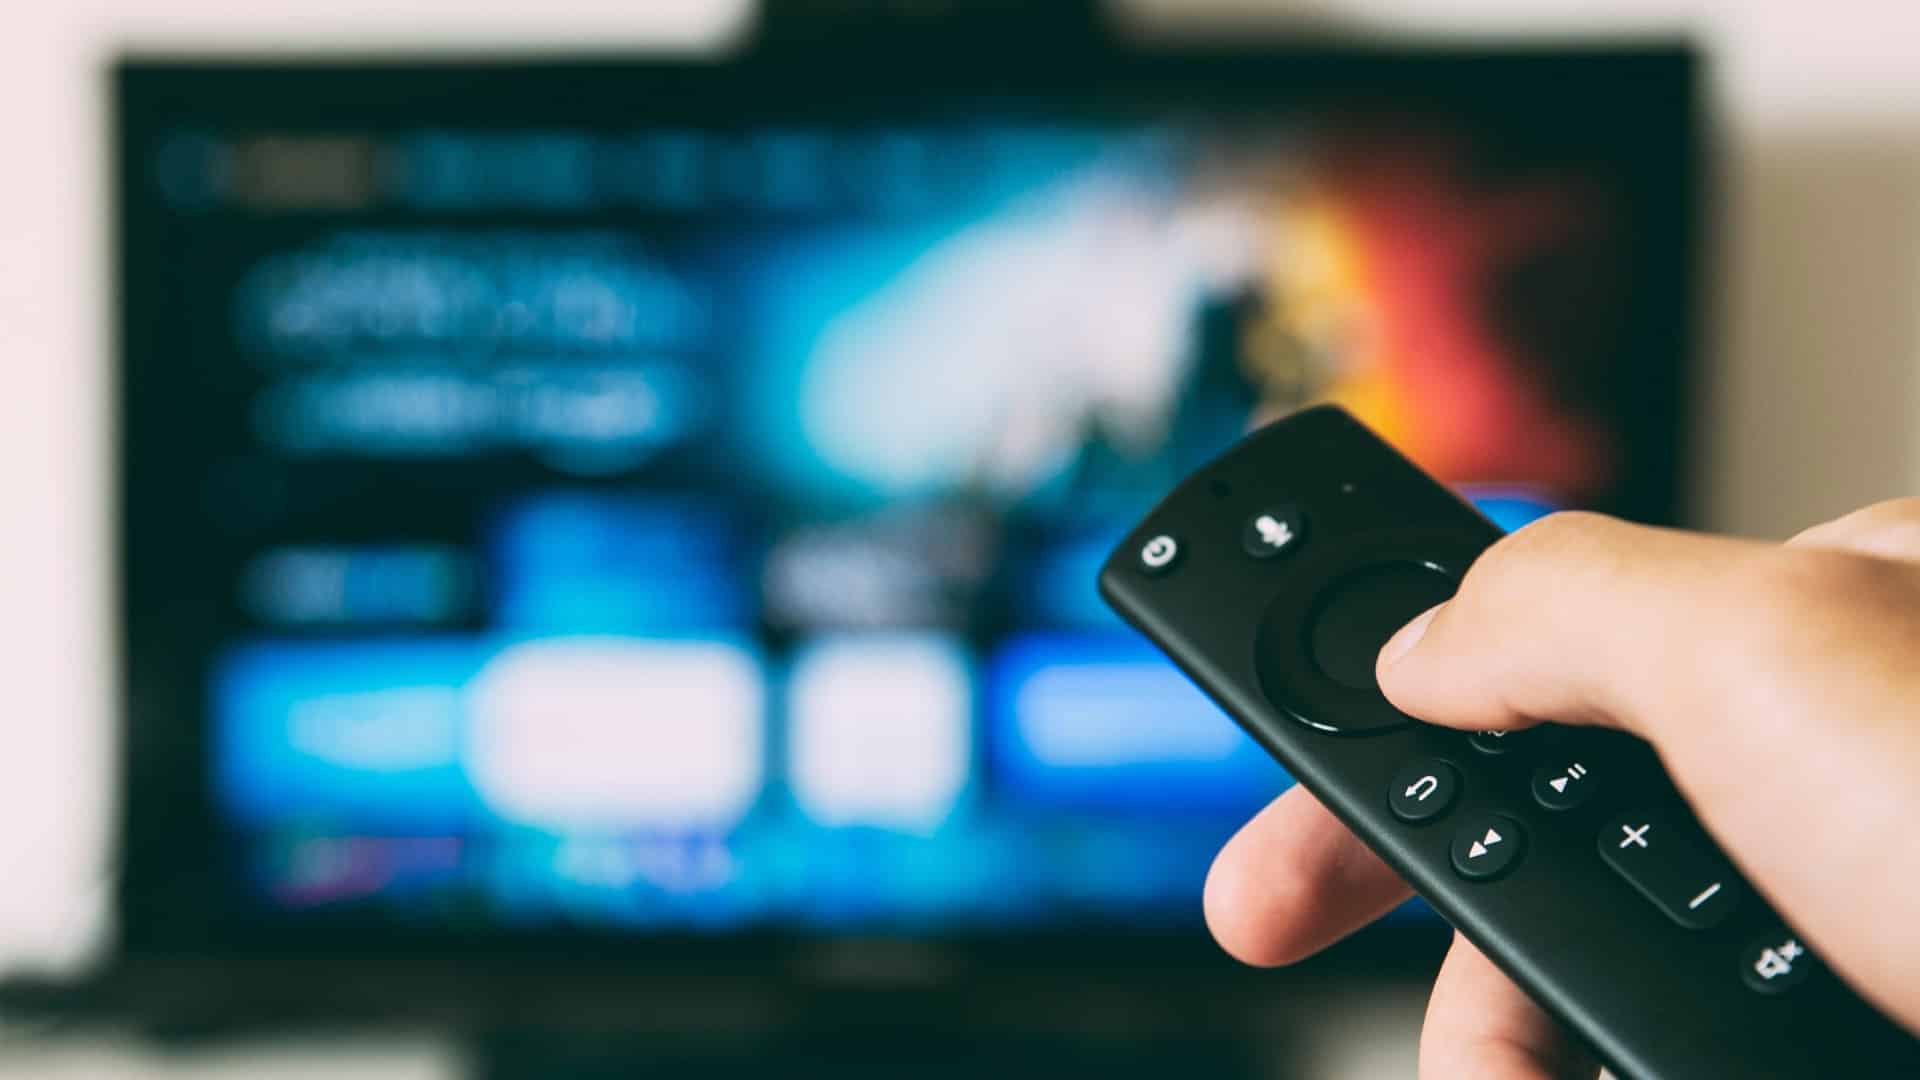 Indian streaming industry expected to grow USD 13-15 billion over the next decade